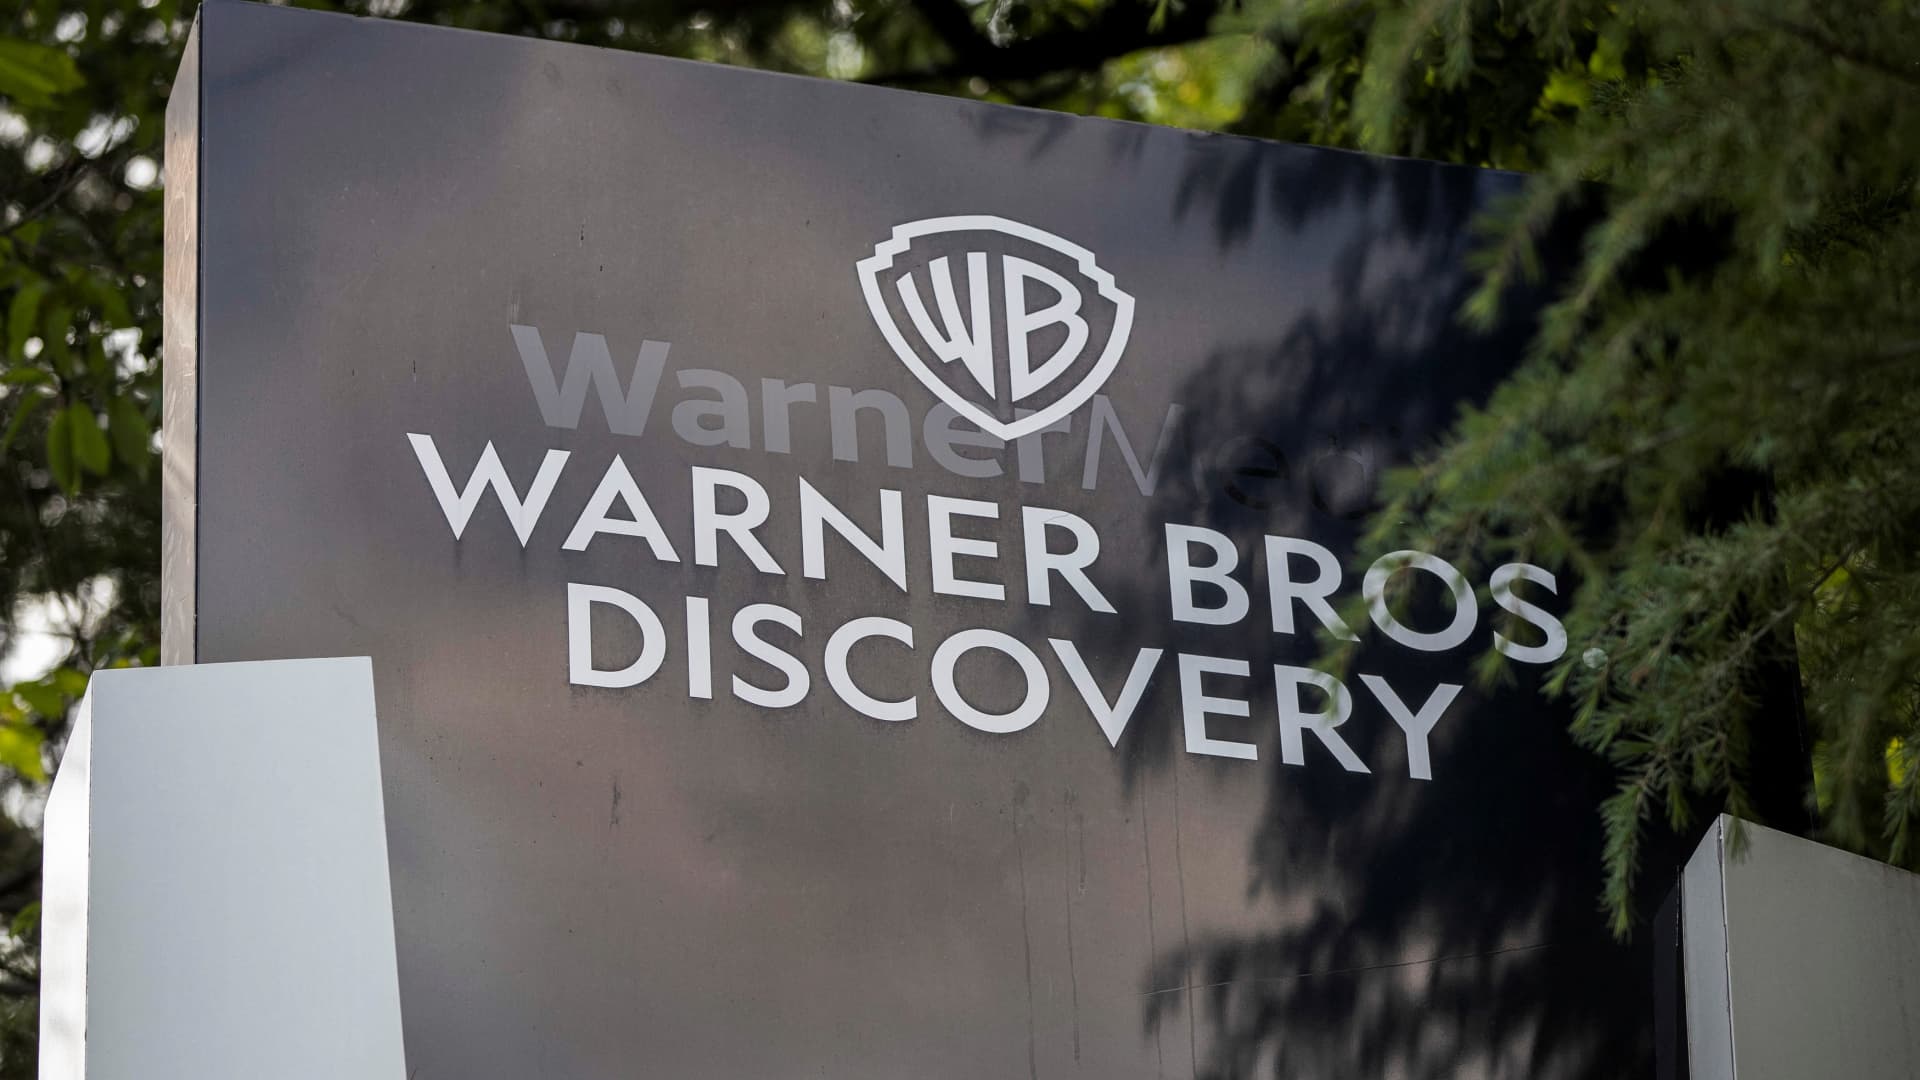 Warner Bros. Discovery misses estimates for revenue and profit but boosts free cash flow